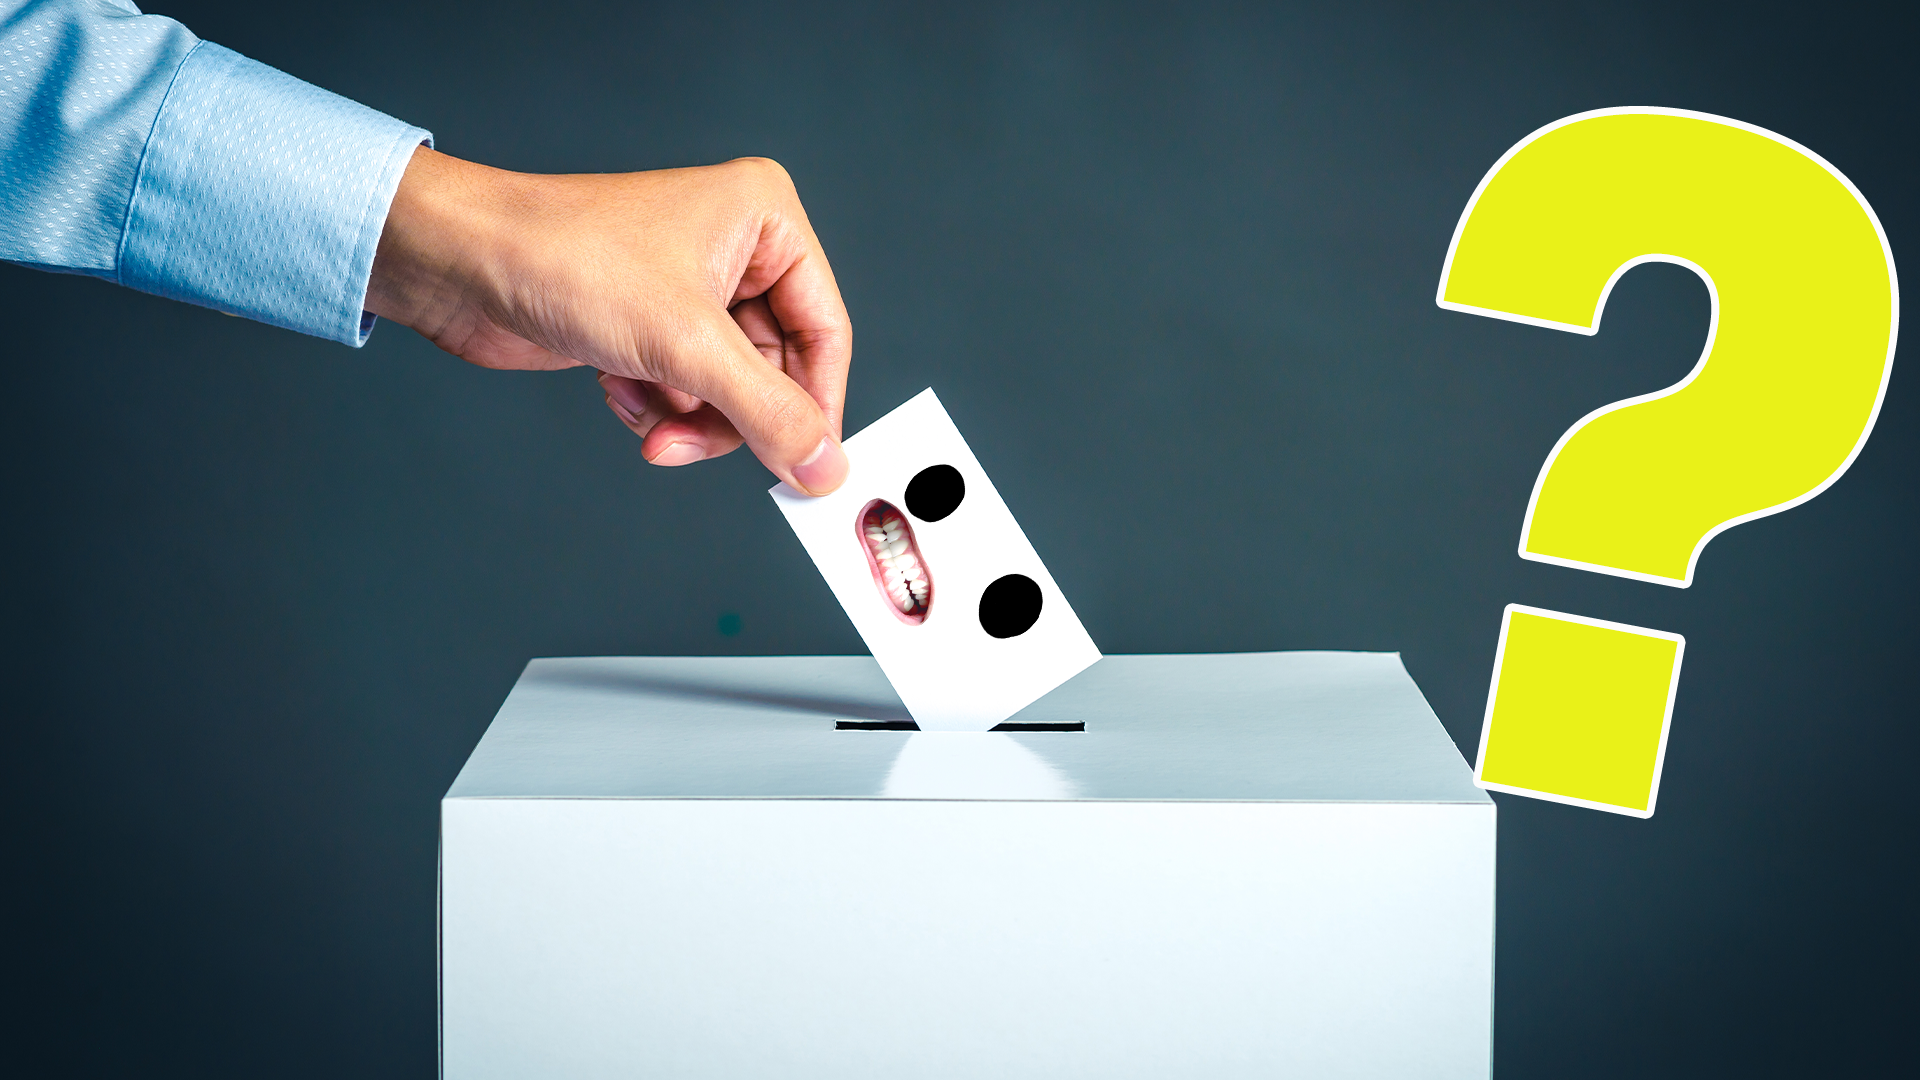 A person in a shirt casting their vote